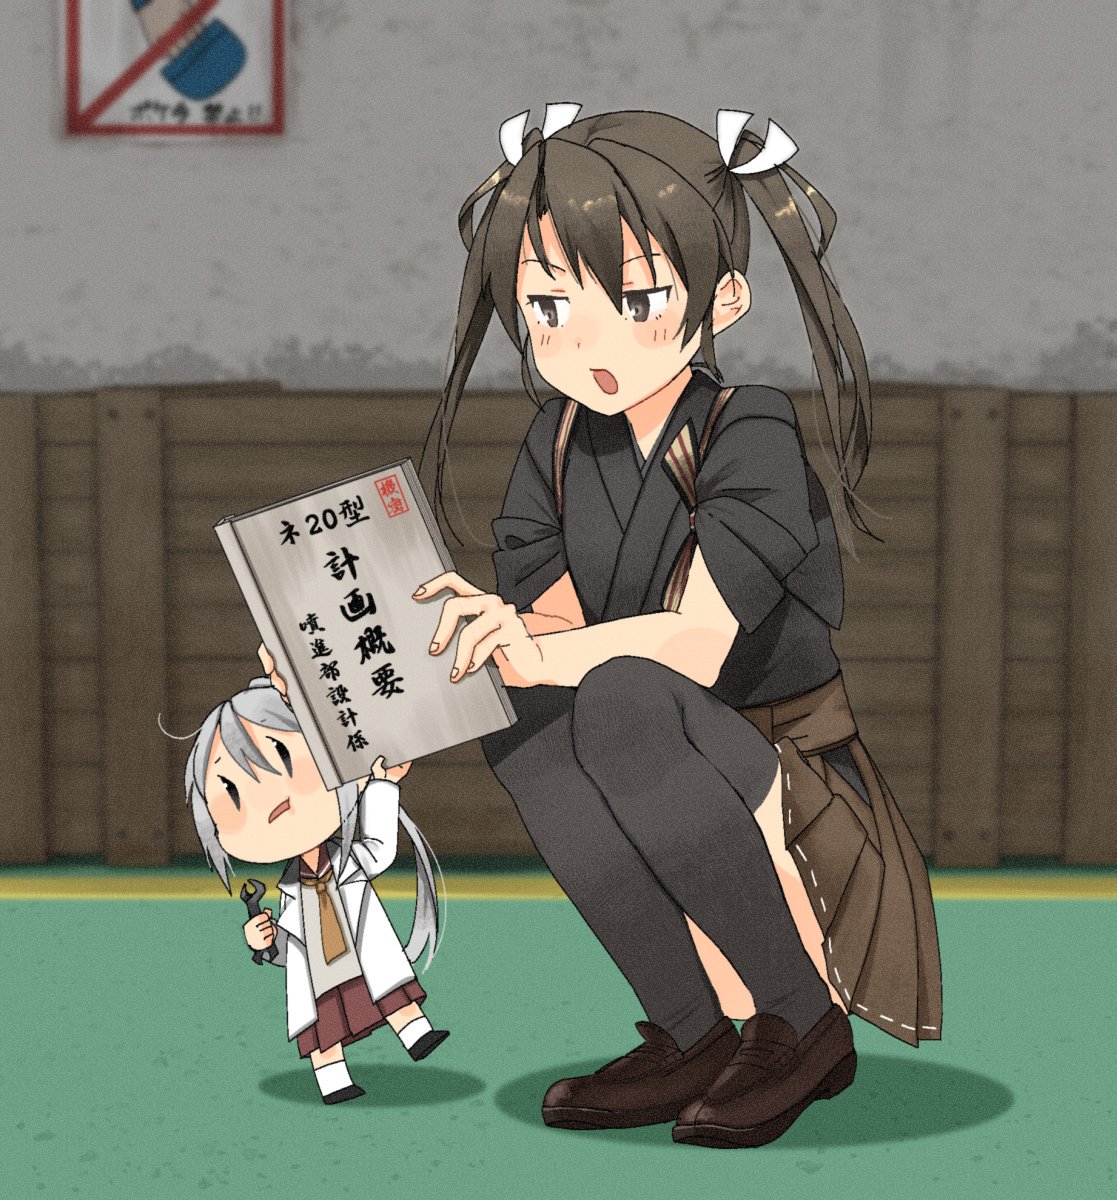 2girls annin_musou black_legwear character_request crate dark_green_hair fairy_(kantai_collection) hakama_skirt highres japanese_clothes kantai_collection labcoat loafers long_hair minigirl multiple_girls school_uniform shoes sign socks squatting thigh-highs translation_request twintails wrench zuikaku_(kantai_collection)